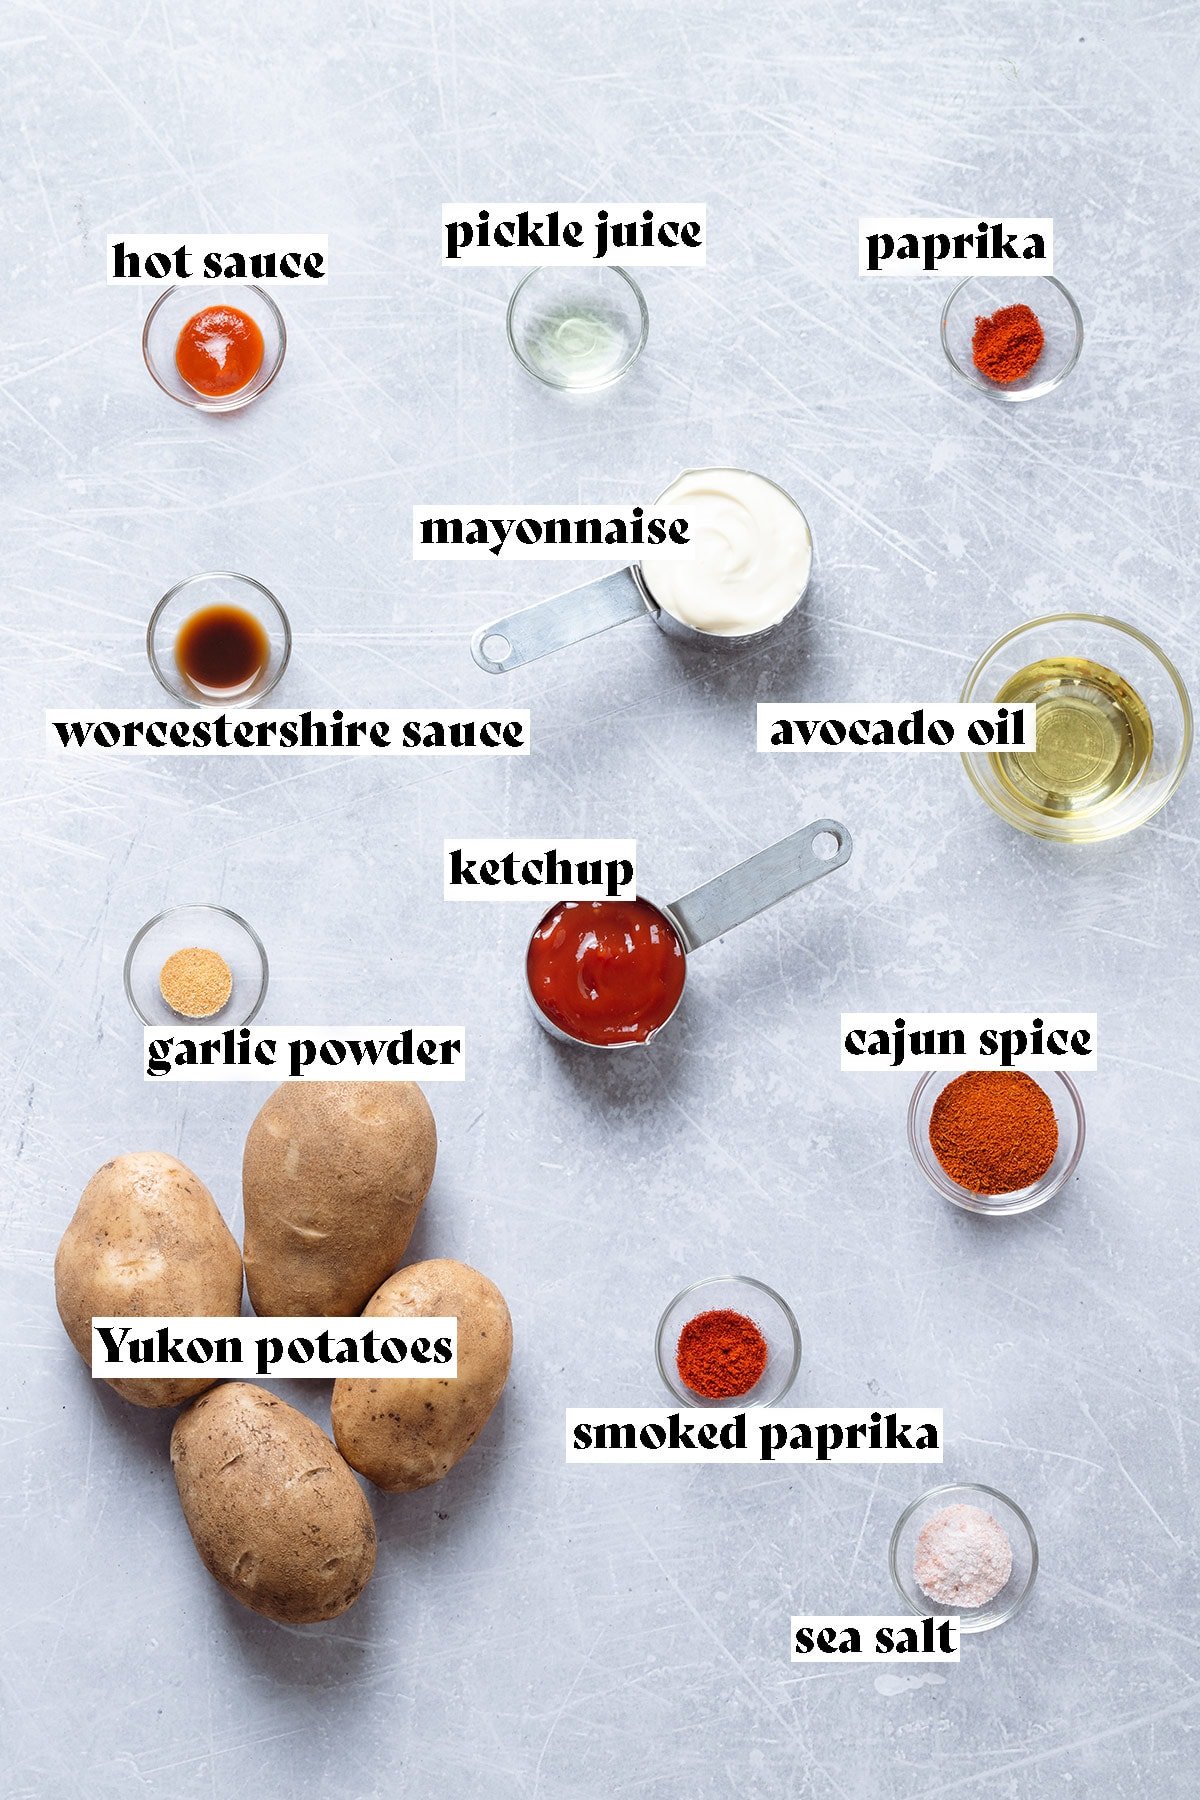 Potatoes, mayonnaise, ketchup, and other ingredients laid out on a grey background.